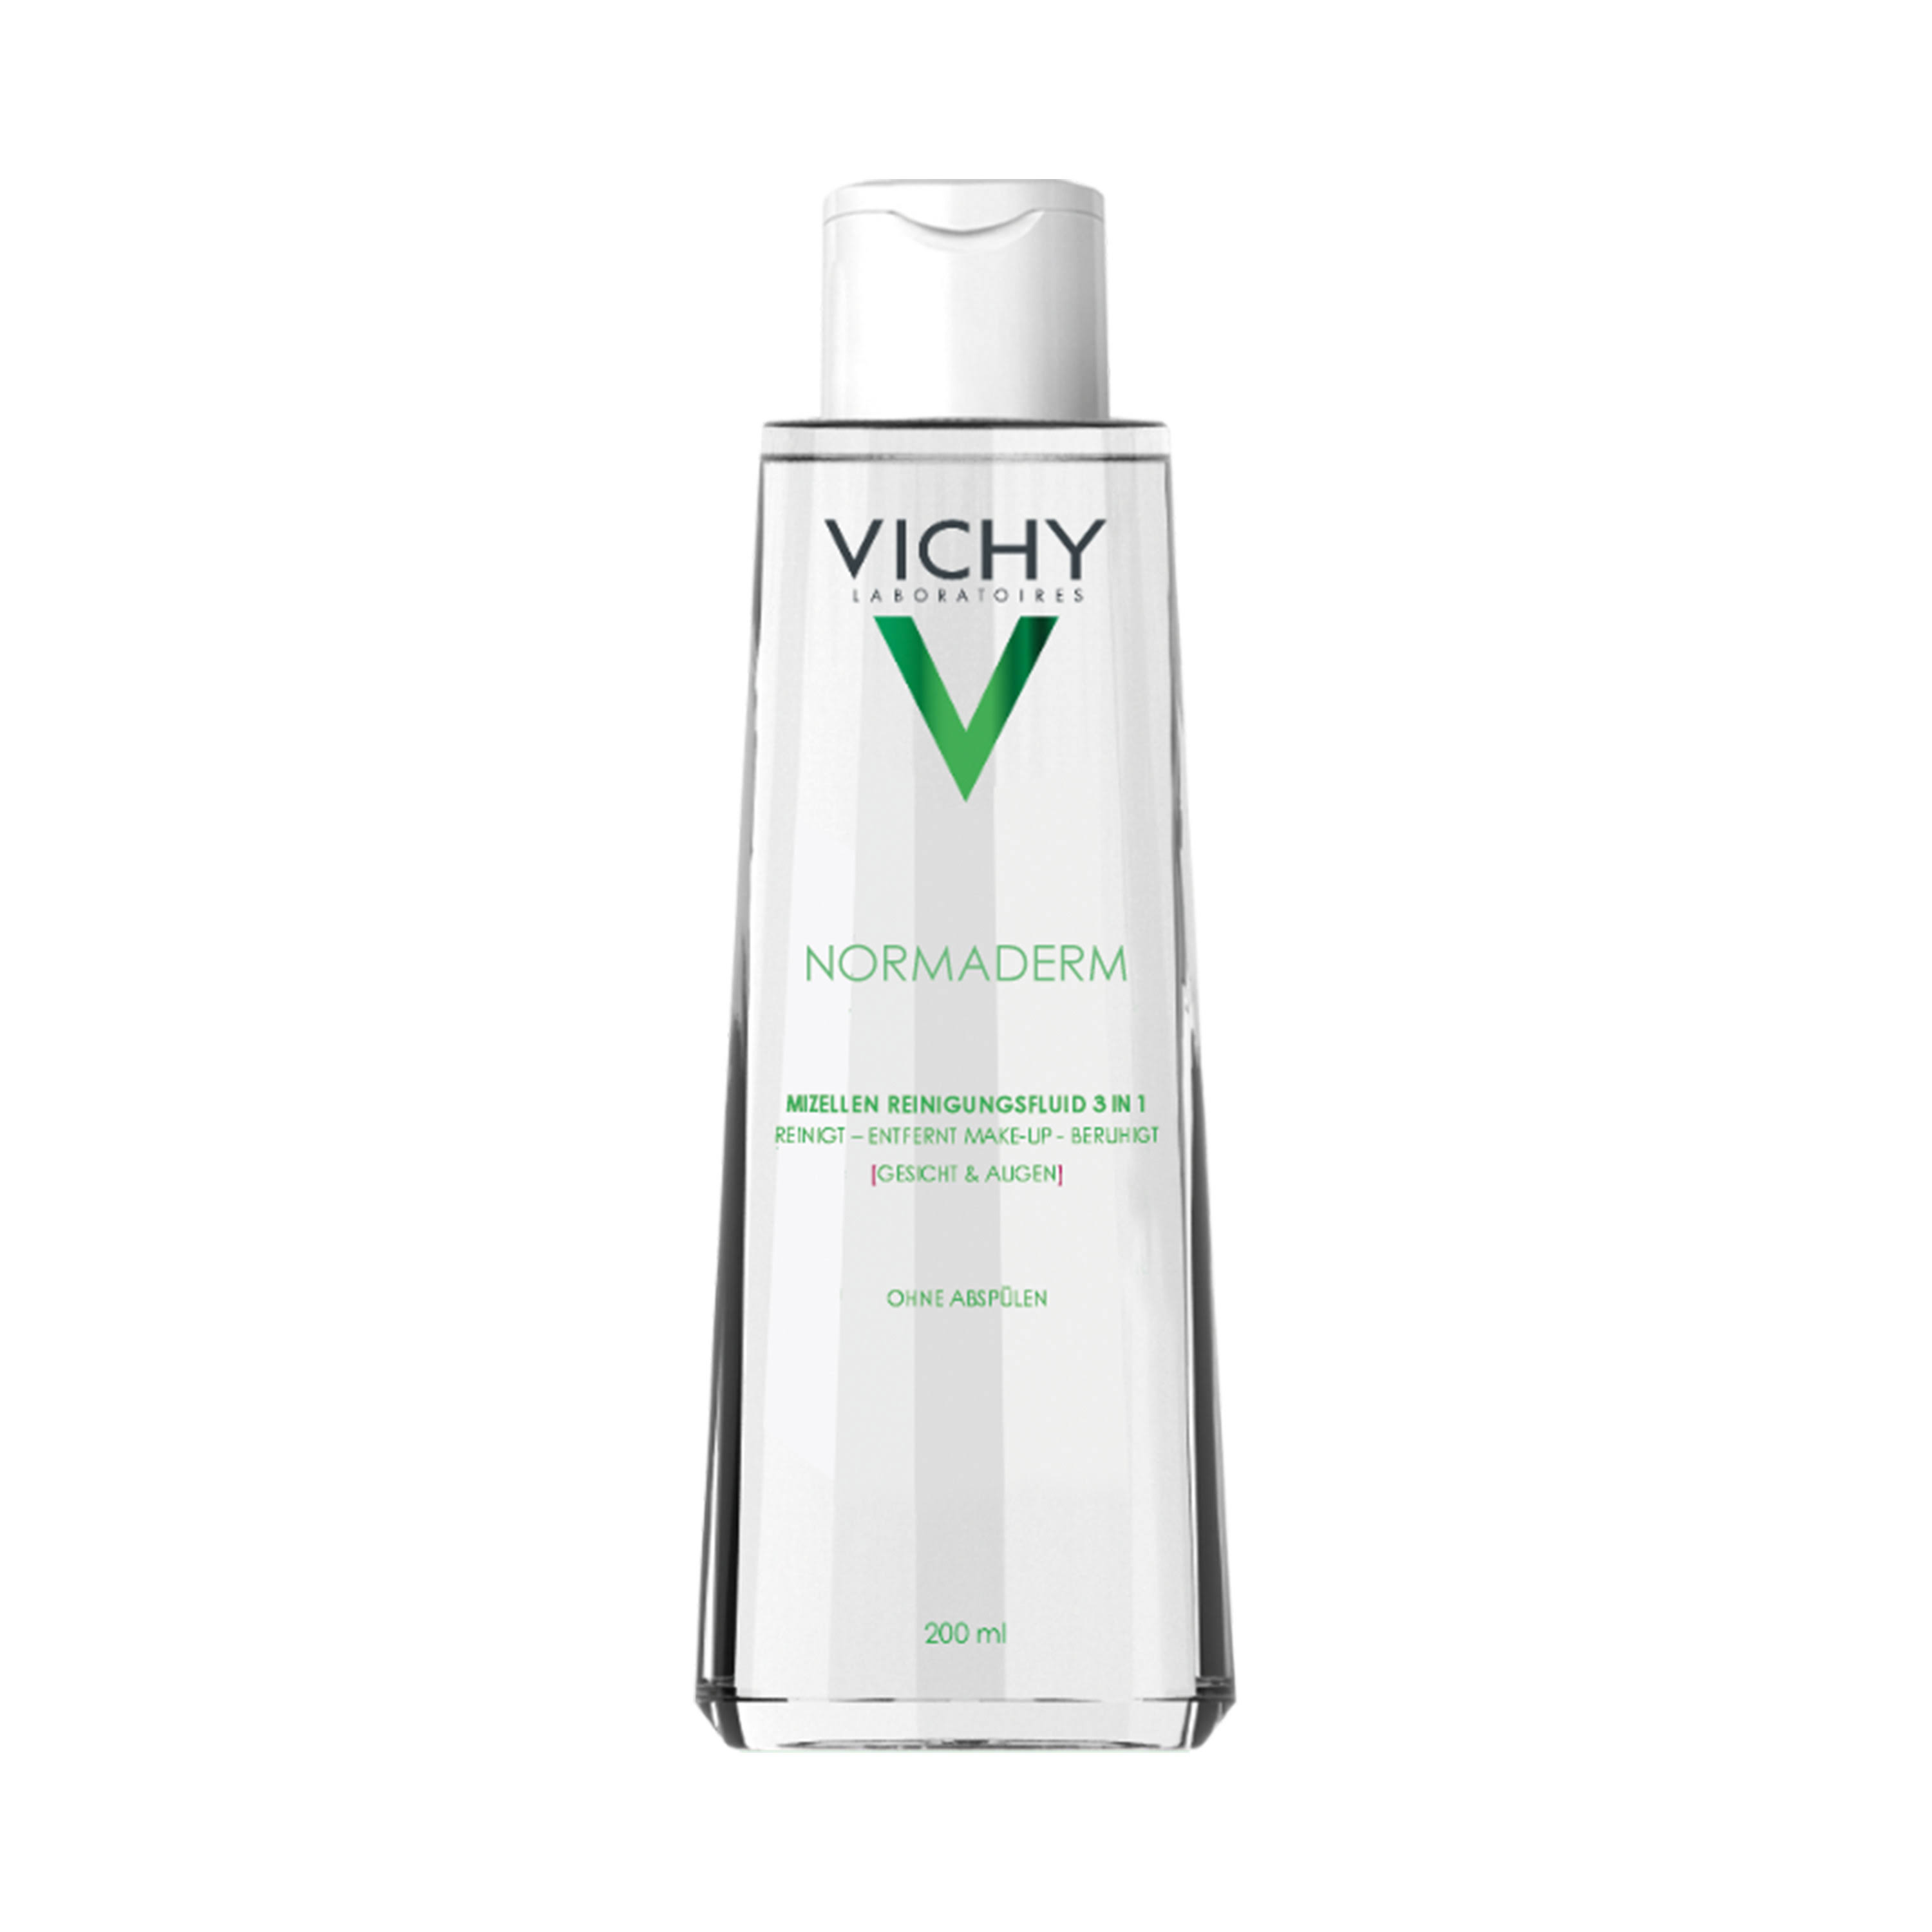 Vichy Normaderm 3in1 Micellar Cleansing Water - 200ml